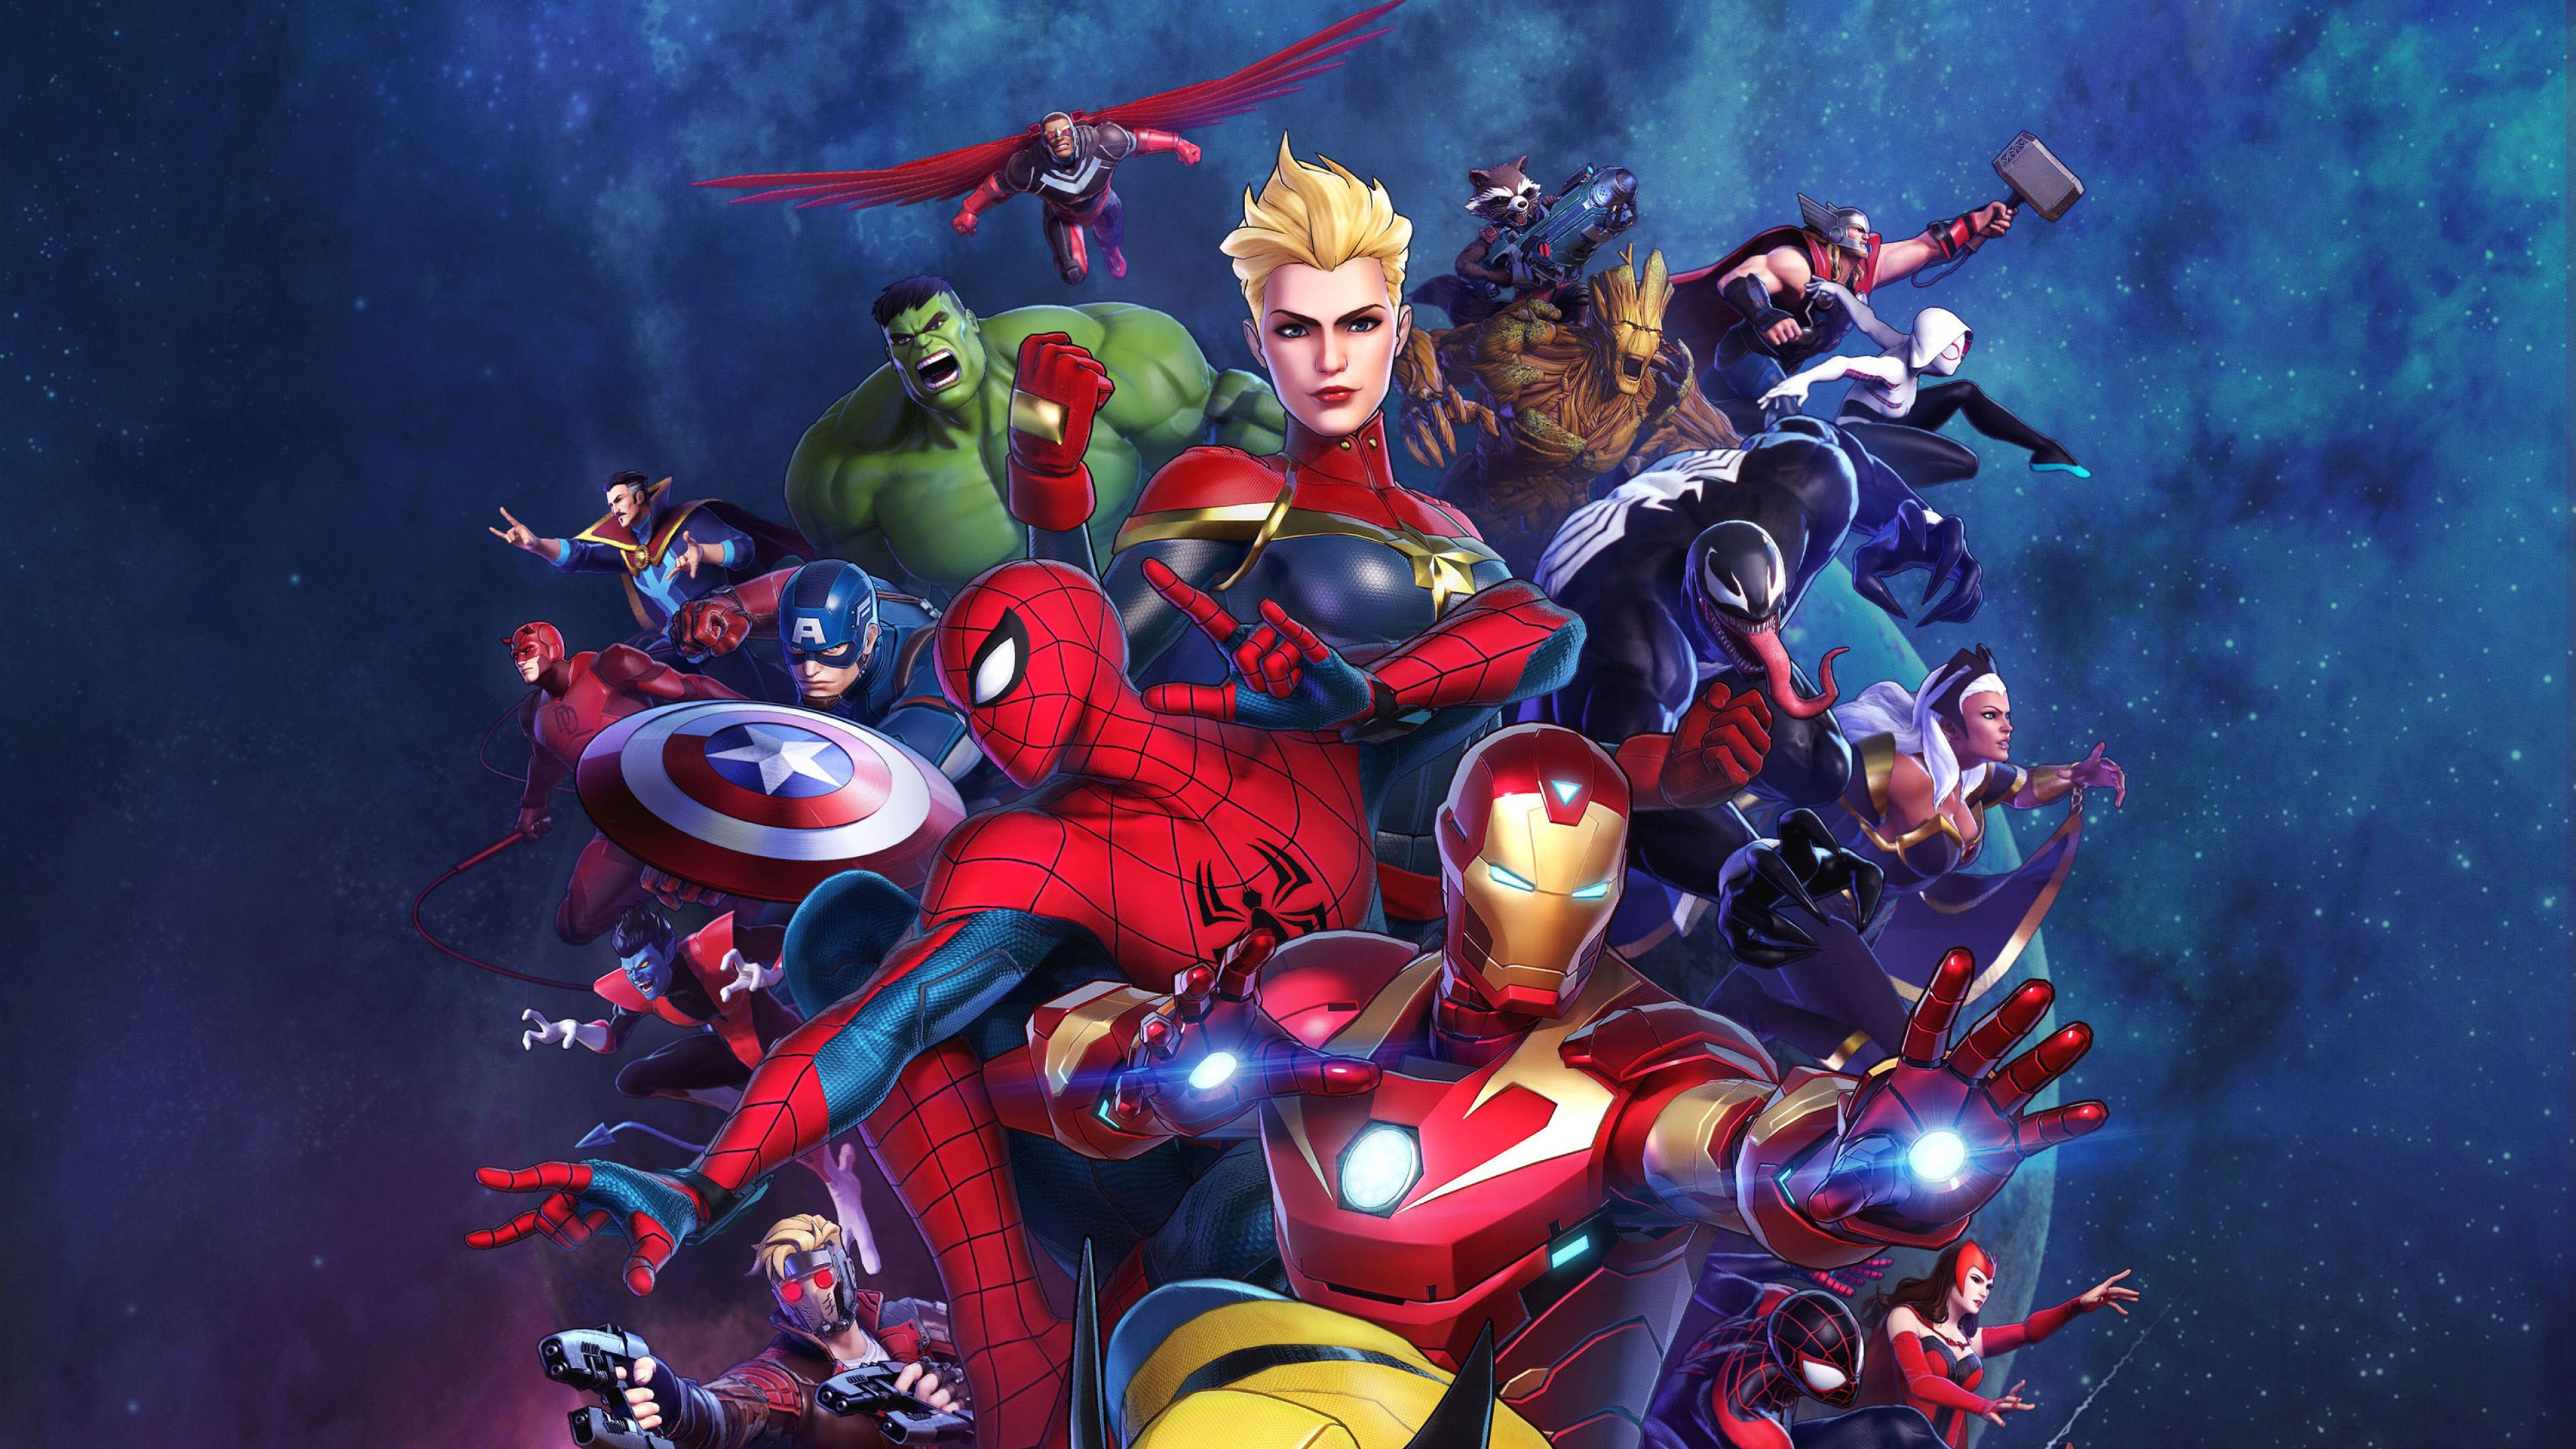 Wallpapers 4k Para Pc Marvel : 4k Marvel Wallpapers Hd Background